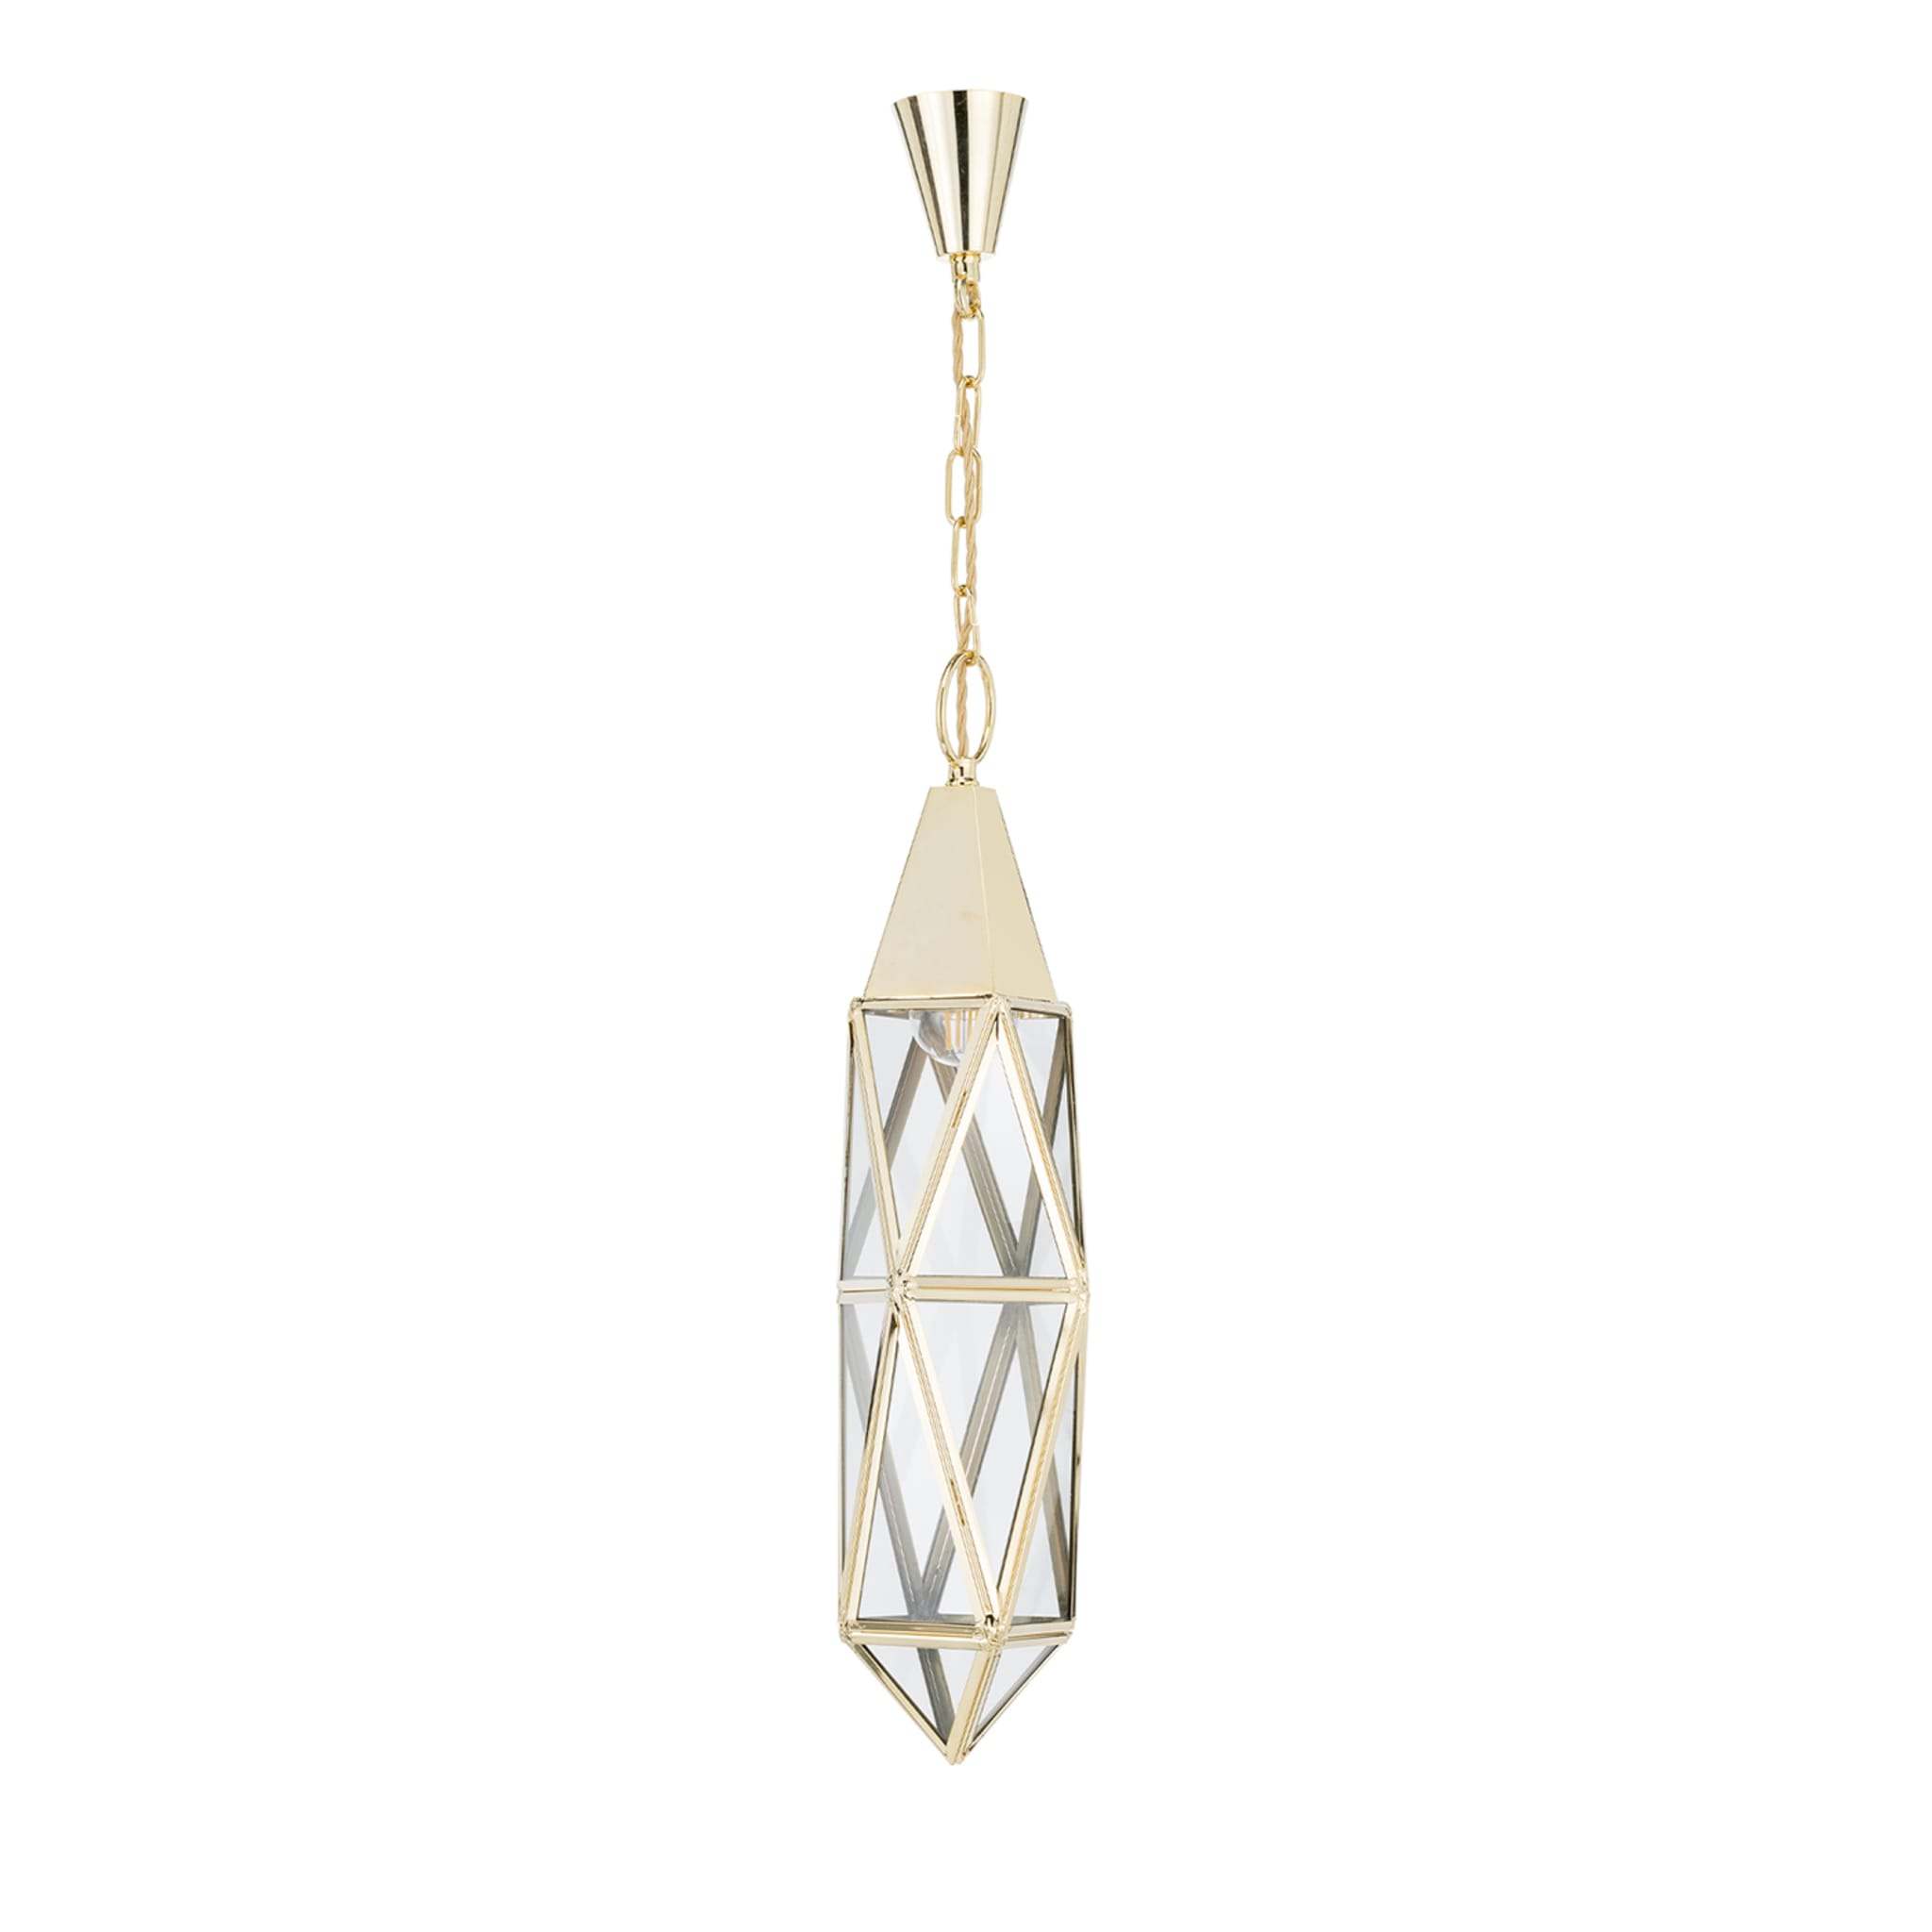 Single-light with Brass Structure Pendant Lamp #1 - Main view